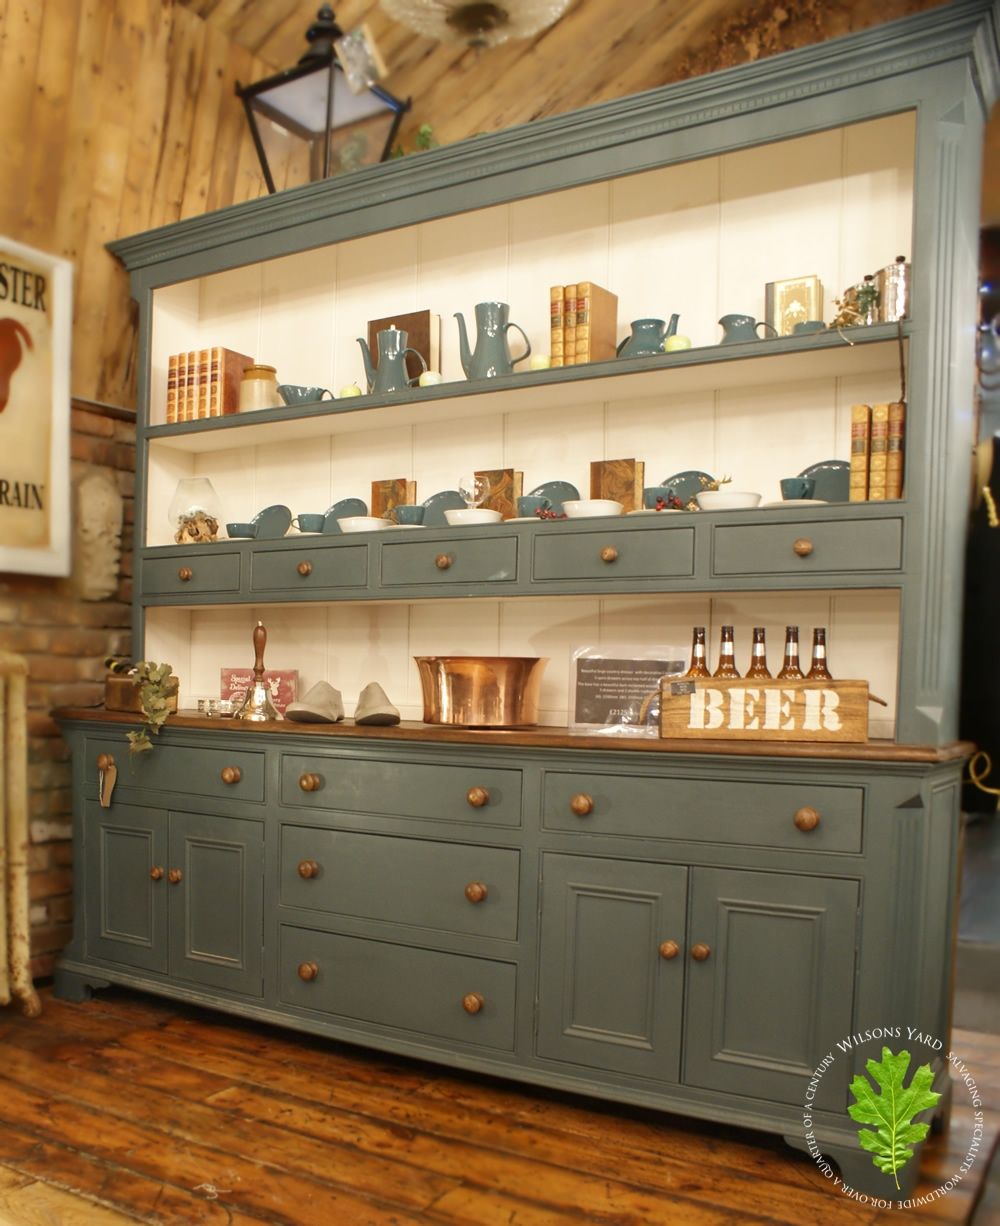 The Elegance of a Kitchen Dresser:
Combining Style and Functionality